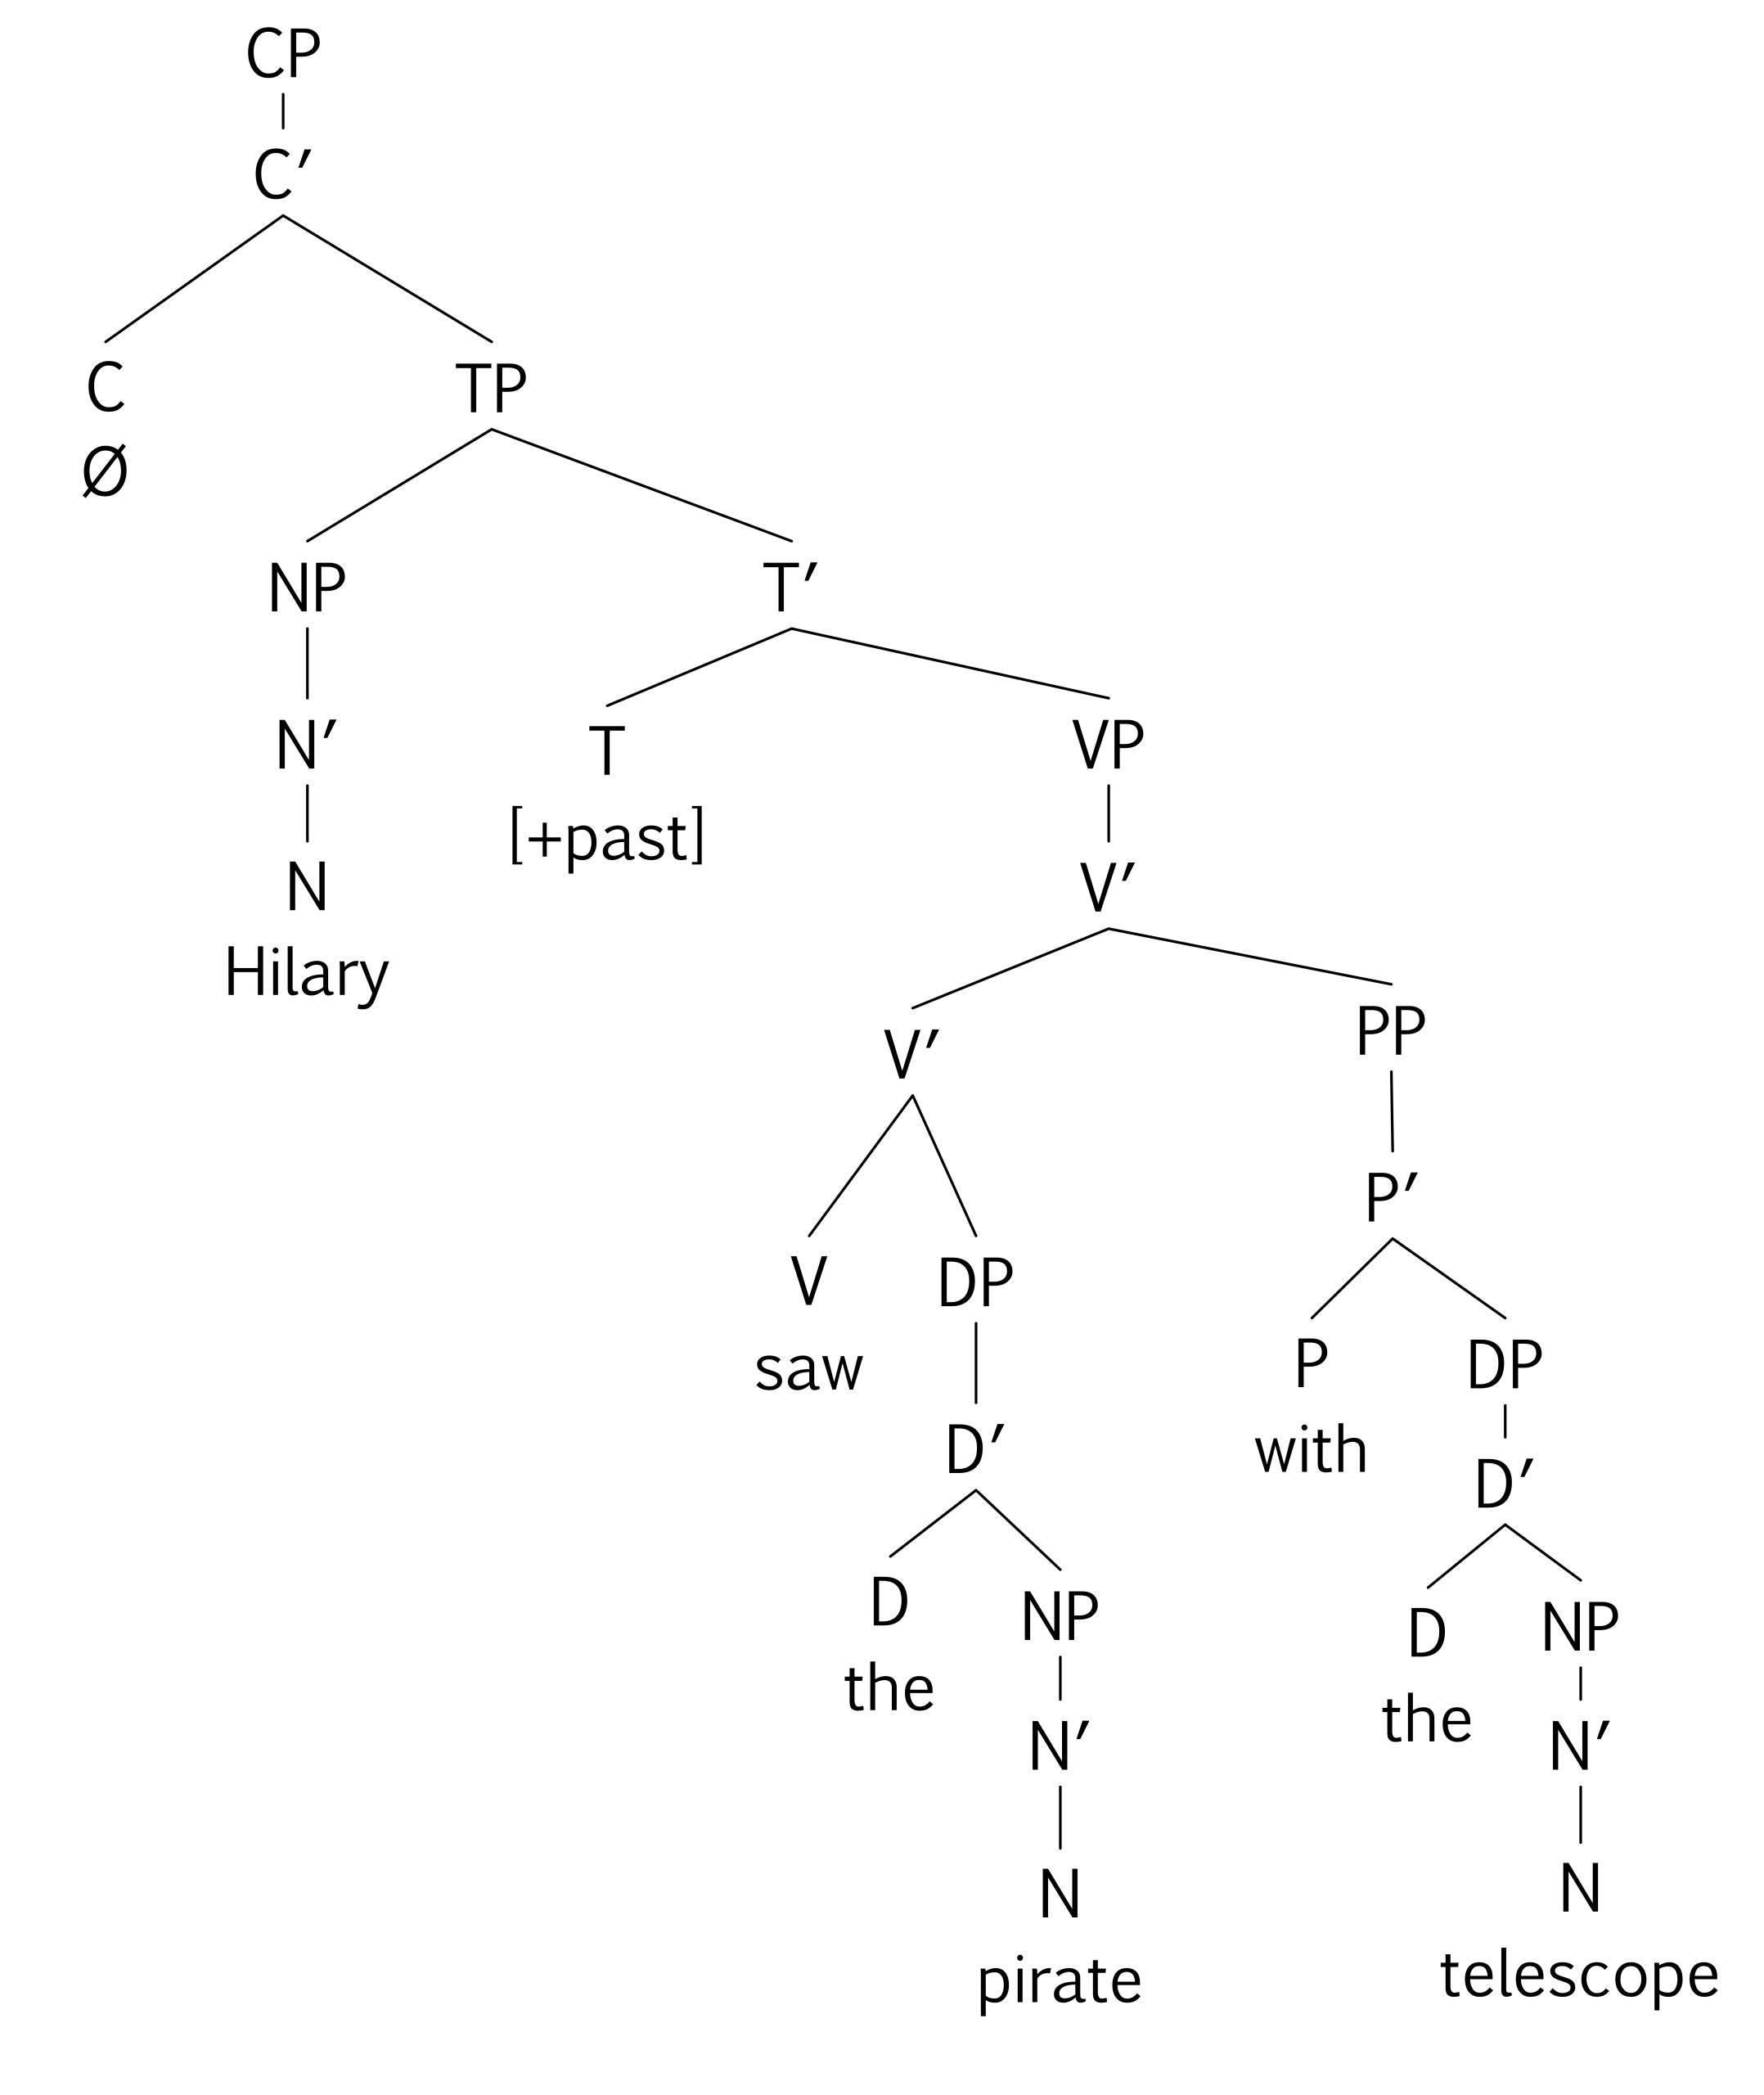 tree diagram: PP [with the telescope] is adjoined to V' headed by V [saw]